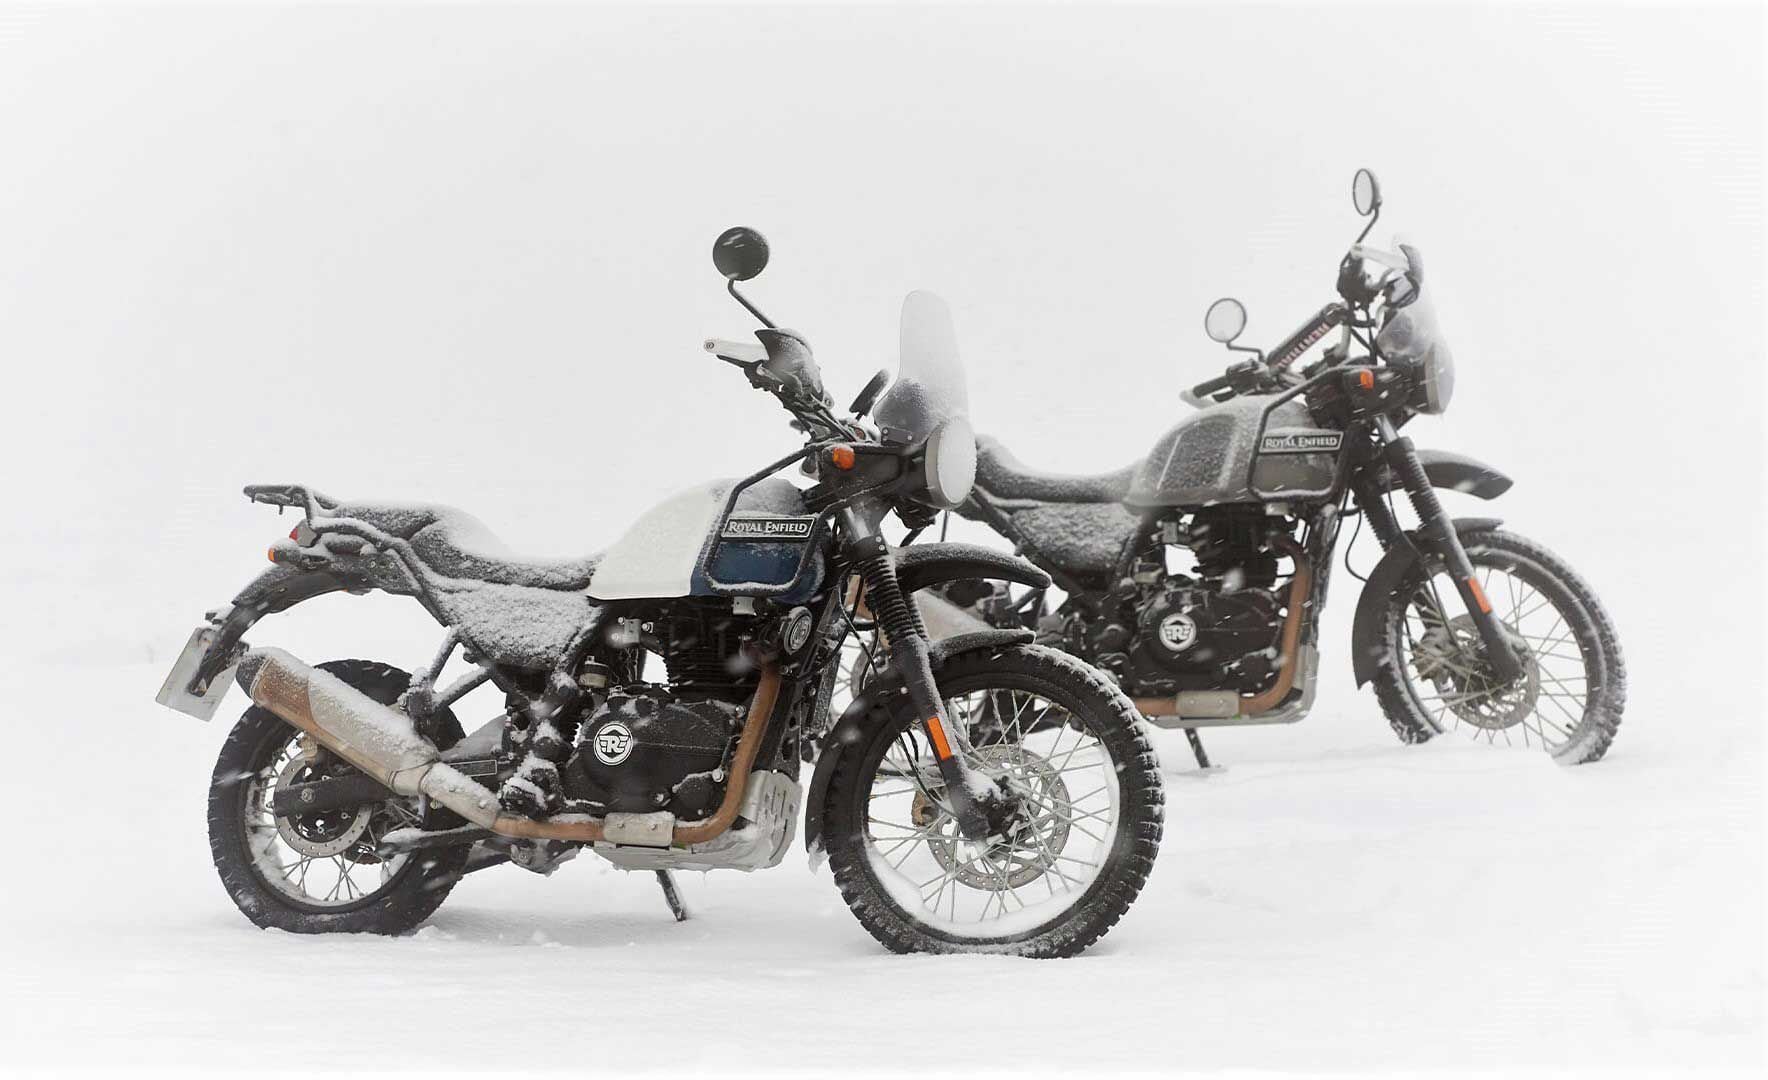 Two Himalayan models were chosen for modification for the expedition, the first of its kind to the South Pole.